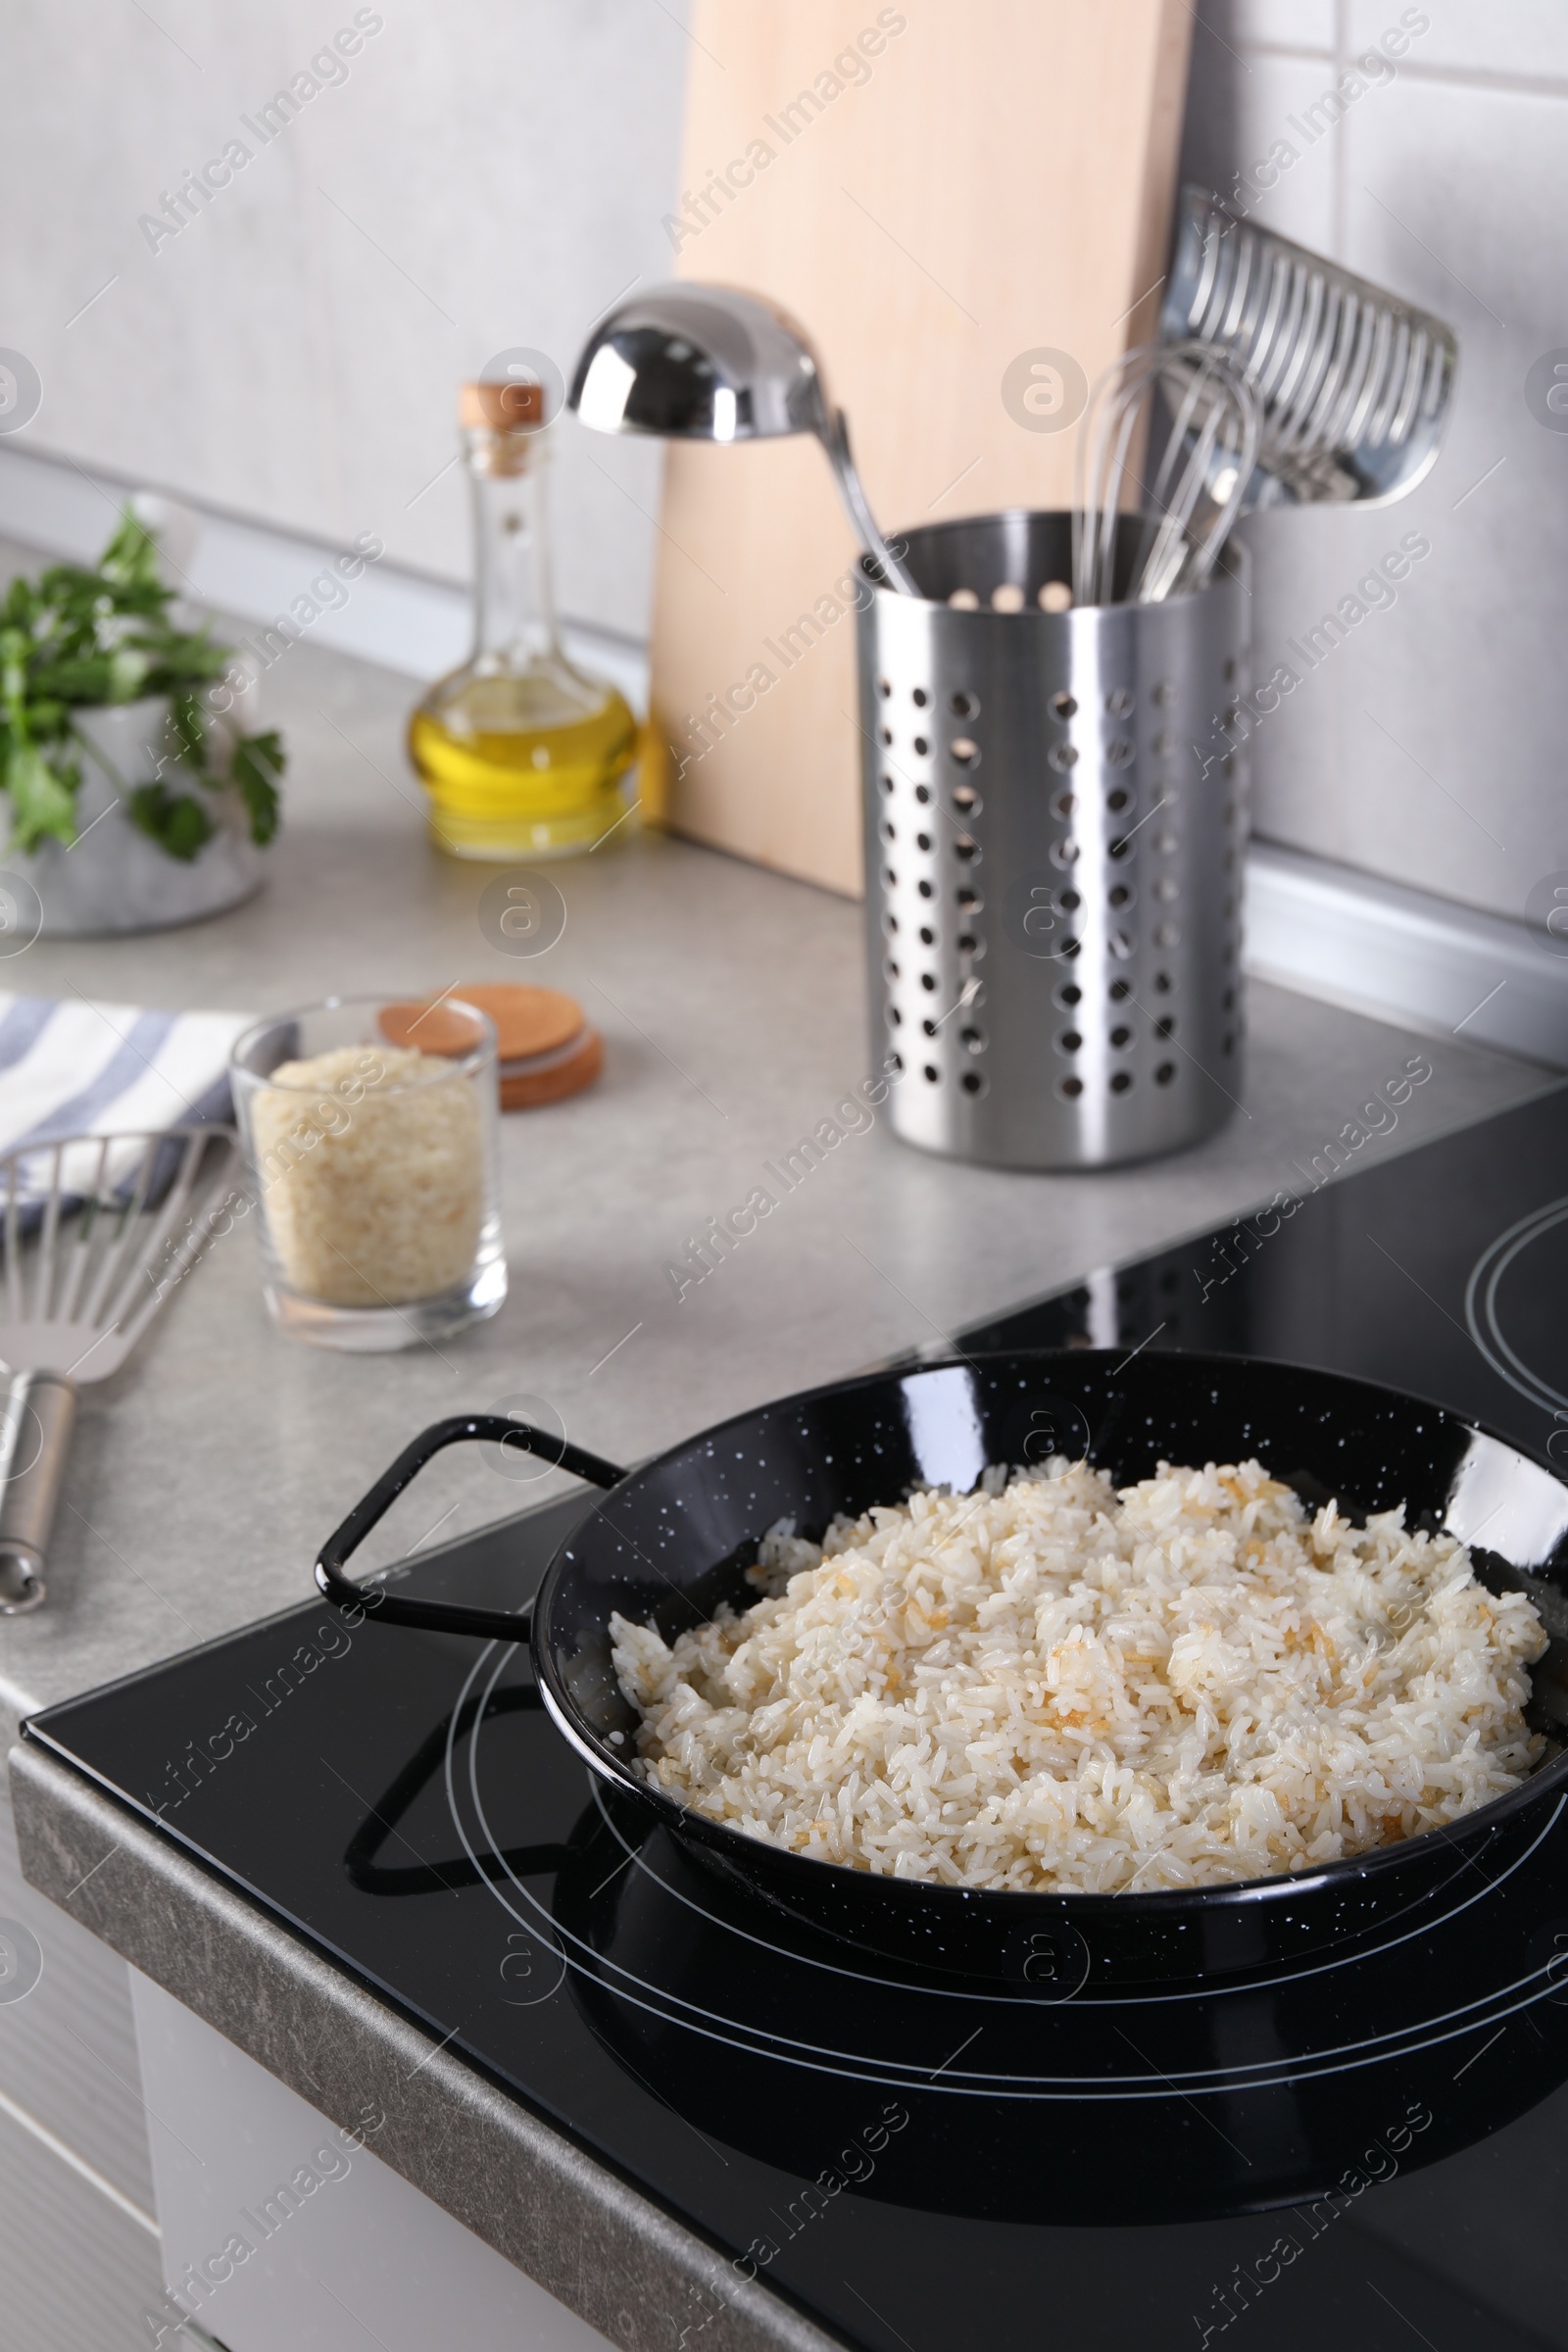 Photo of Cooking tasty rice on induction stove in kitchen